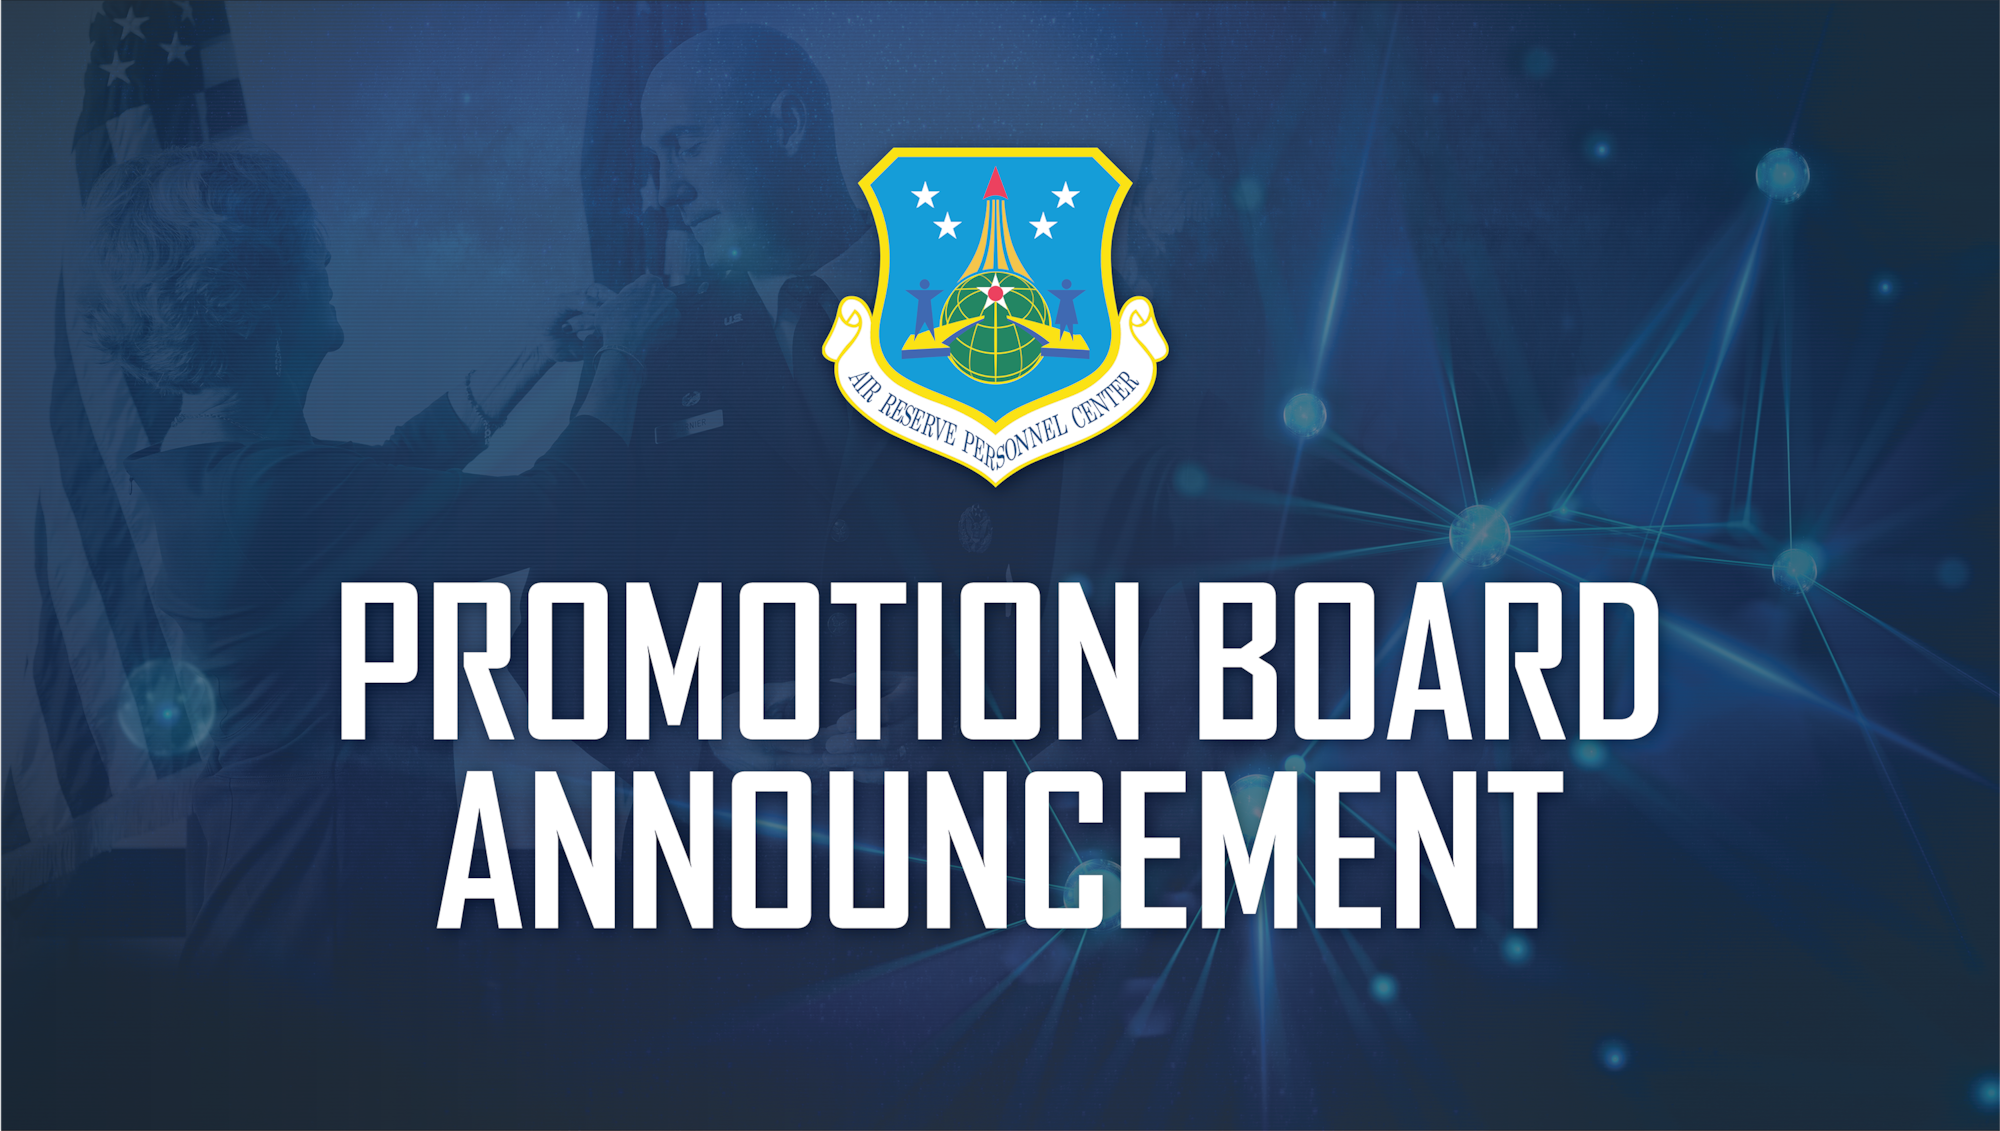 Promotion Board Announcement graphic.